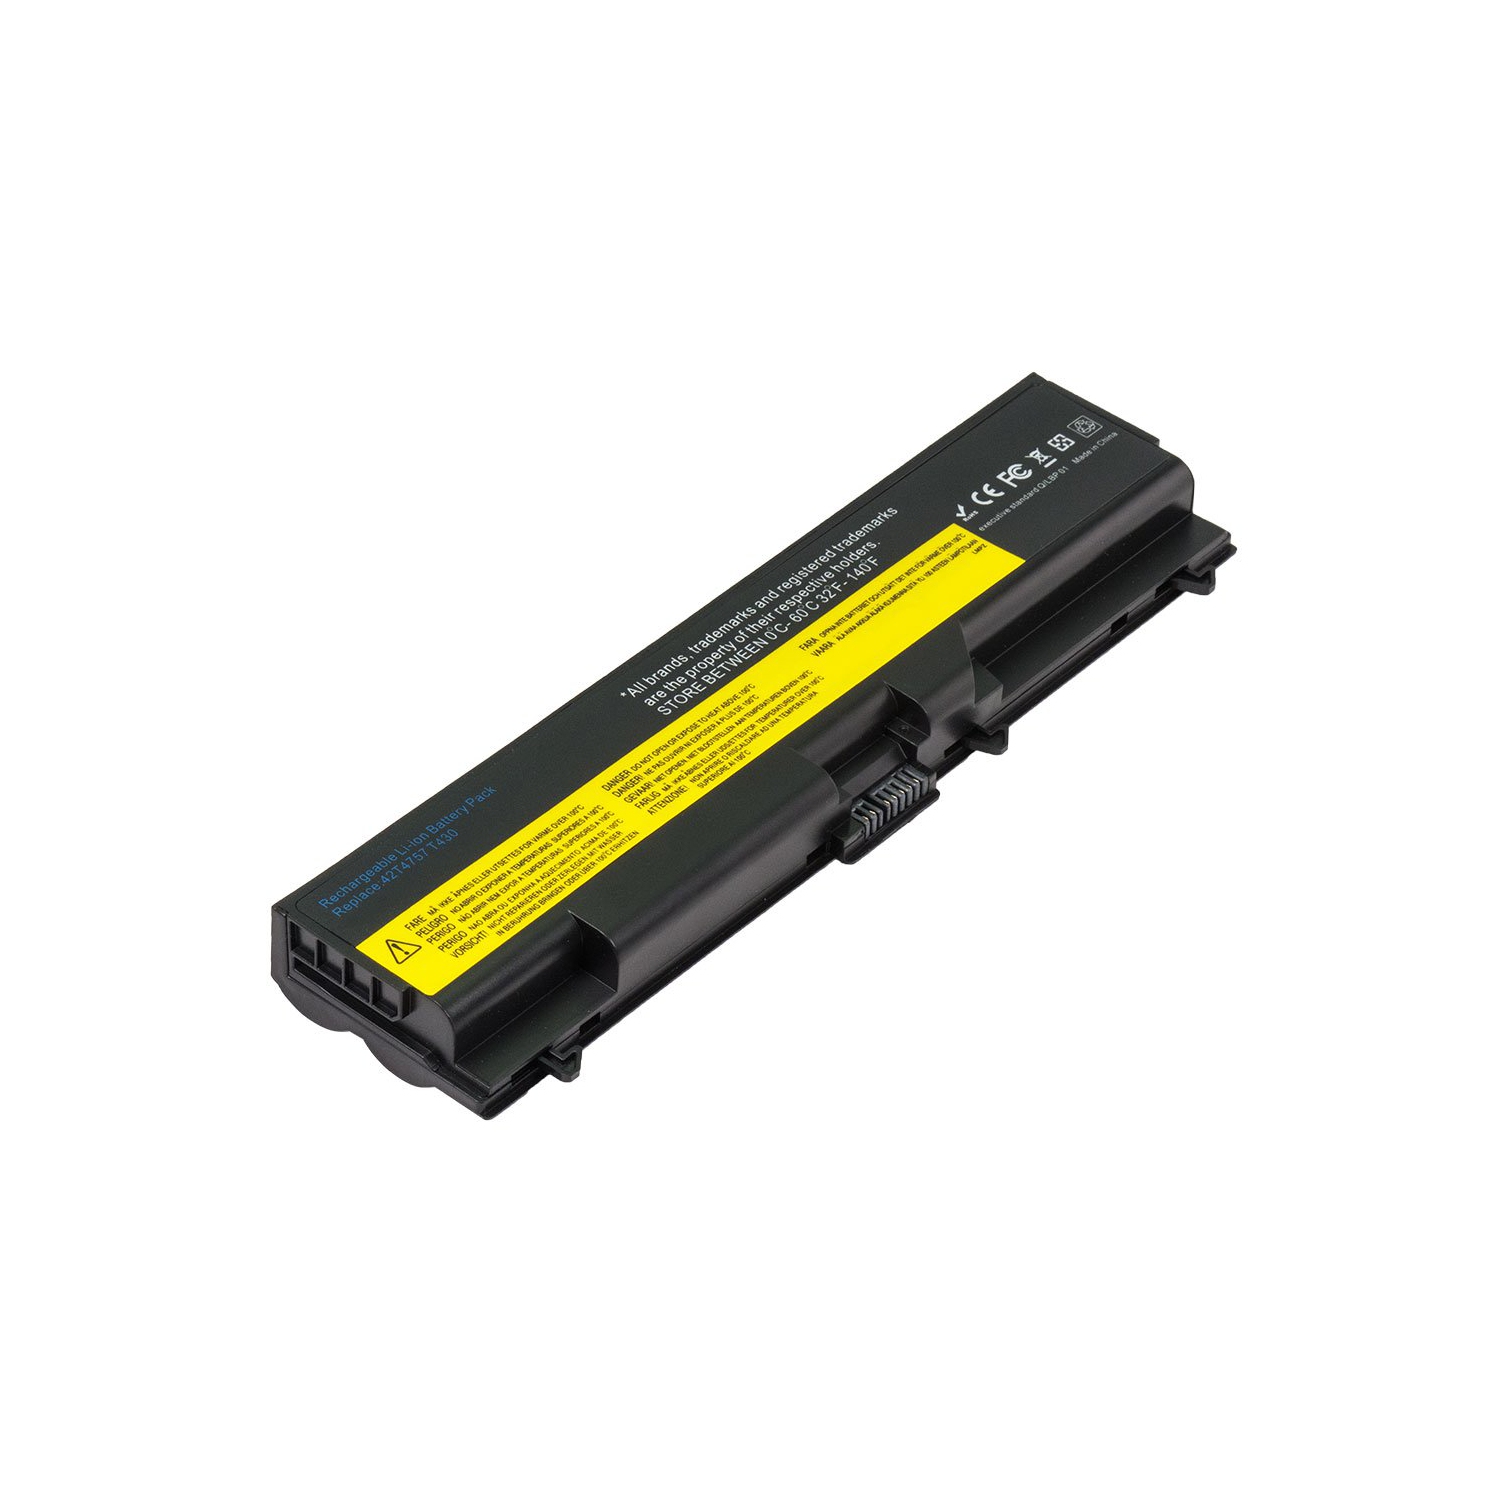 Laptop Battery Replacement for Lenovo ThinkPad L530 2485-22U, 42T4706, 42T4733, 42T4755, 42T4791, 42T4885, 51J0499, 45N1015